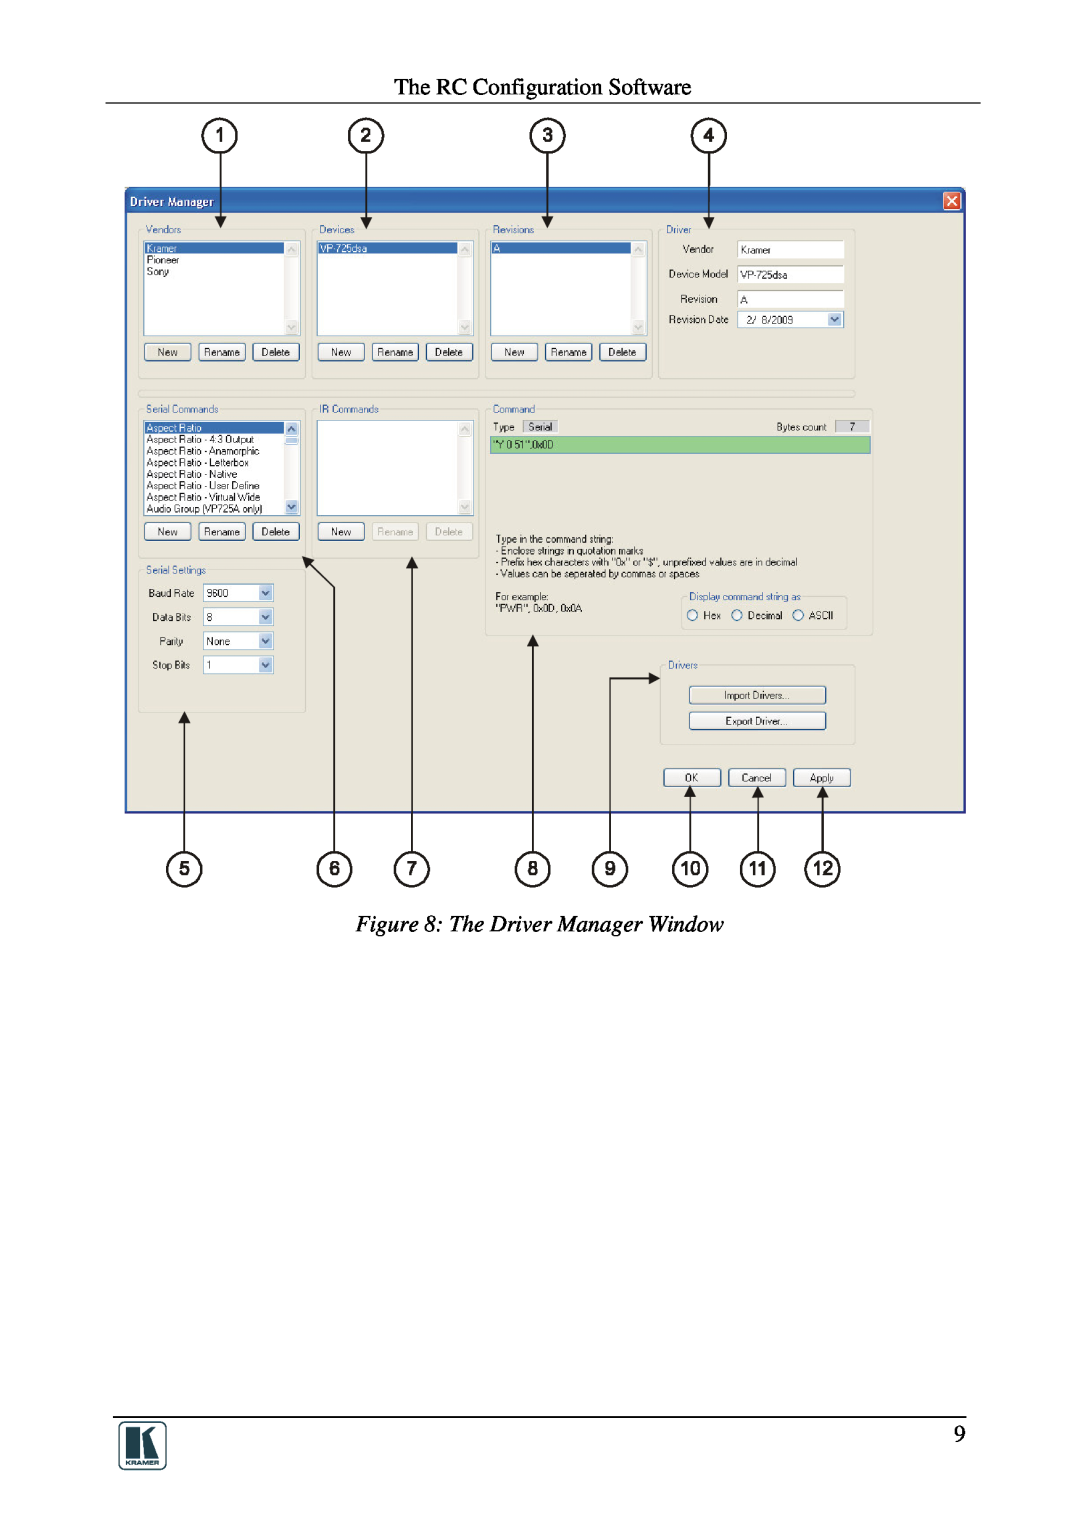 Kramer Electronics RC-SV manual The RC Configuration Software, The Driver Manager Window 